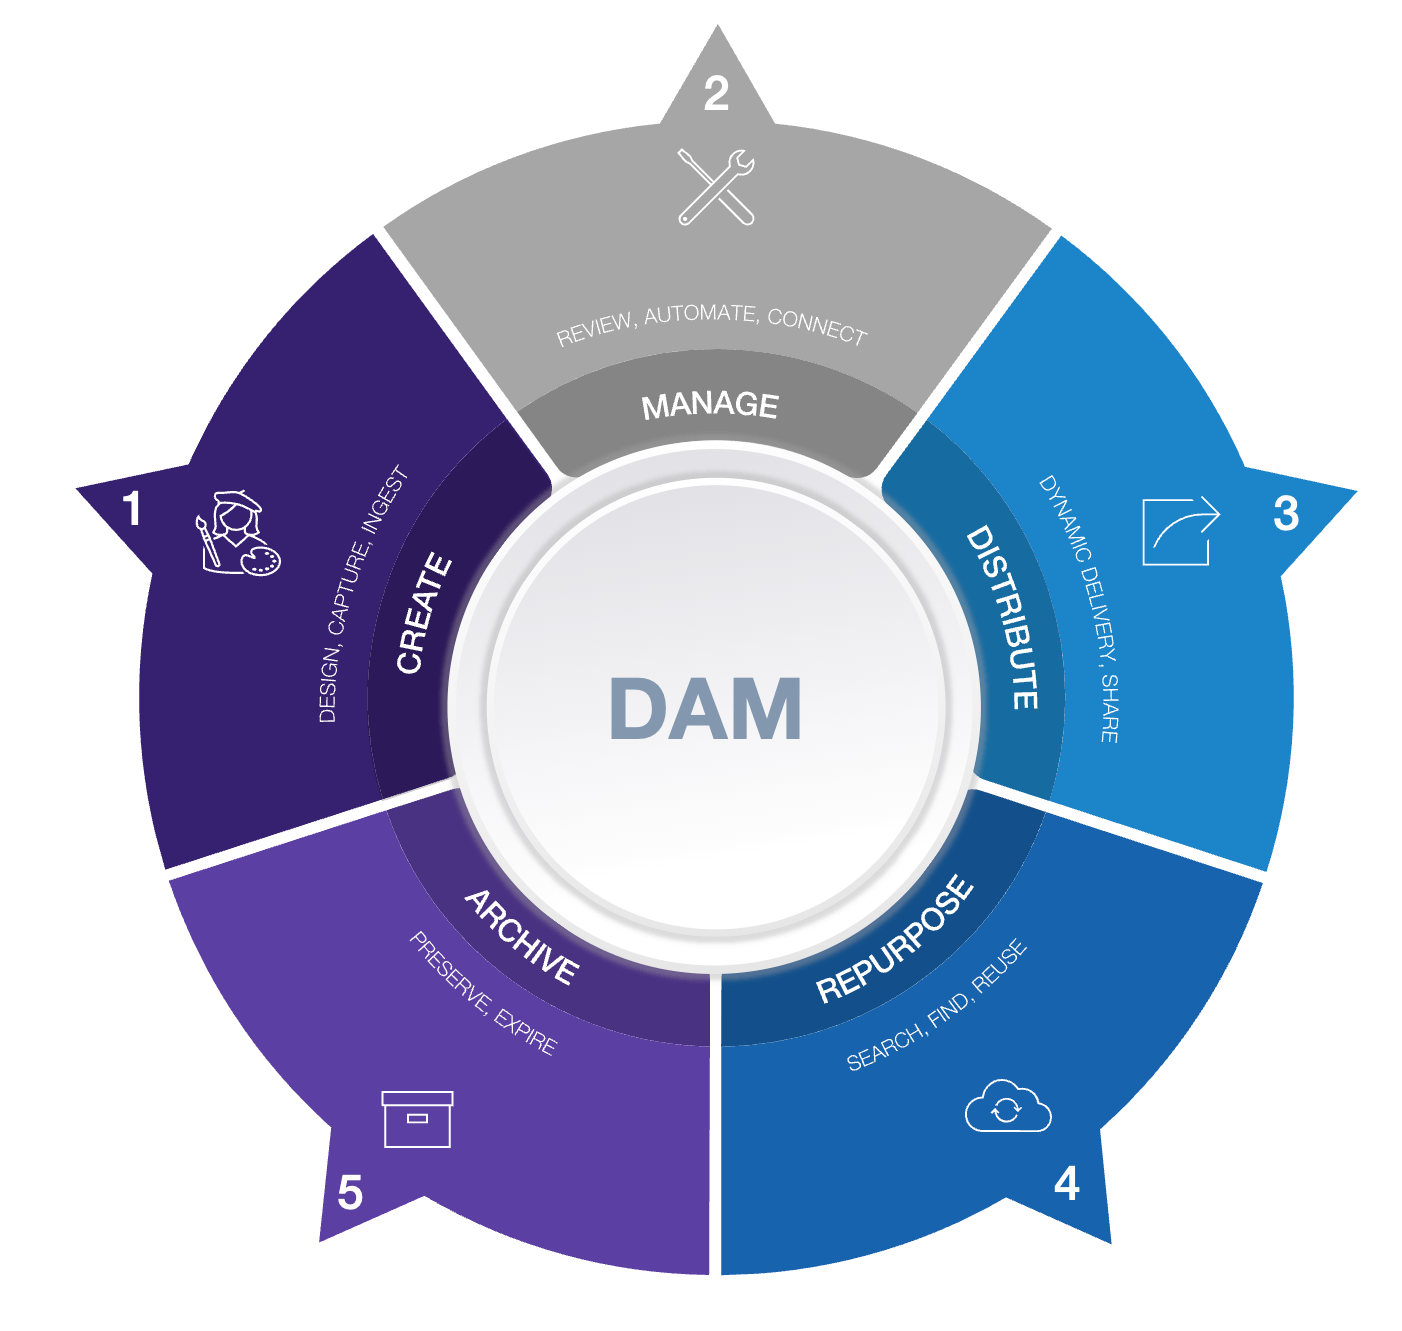 DAM, Asset Lifecycle, Create, Manage, Distribute, Repurpose, Archive